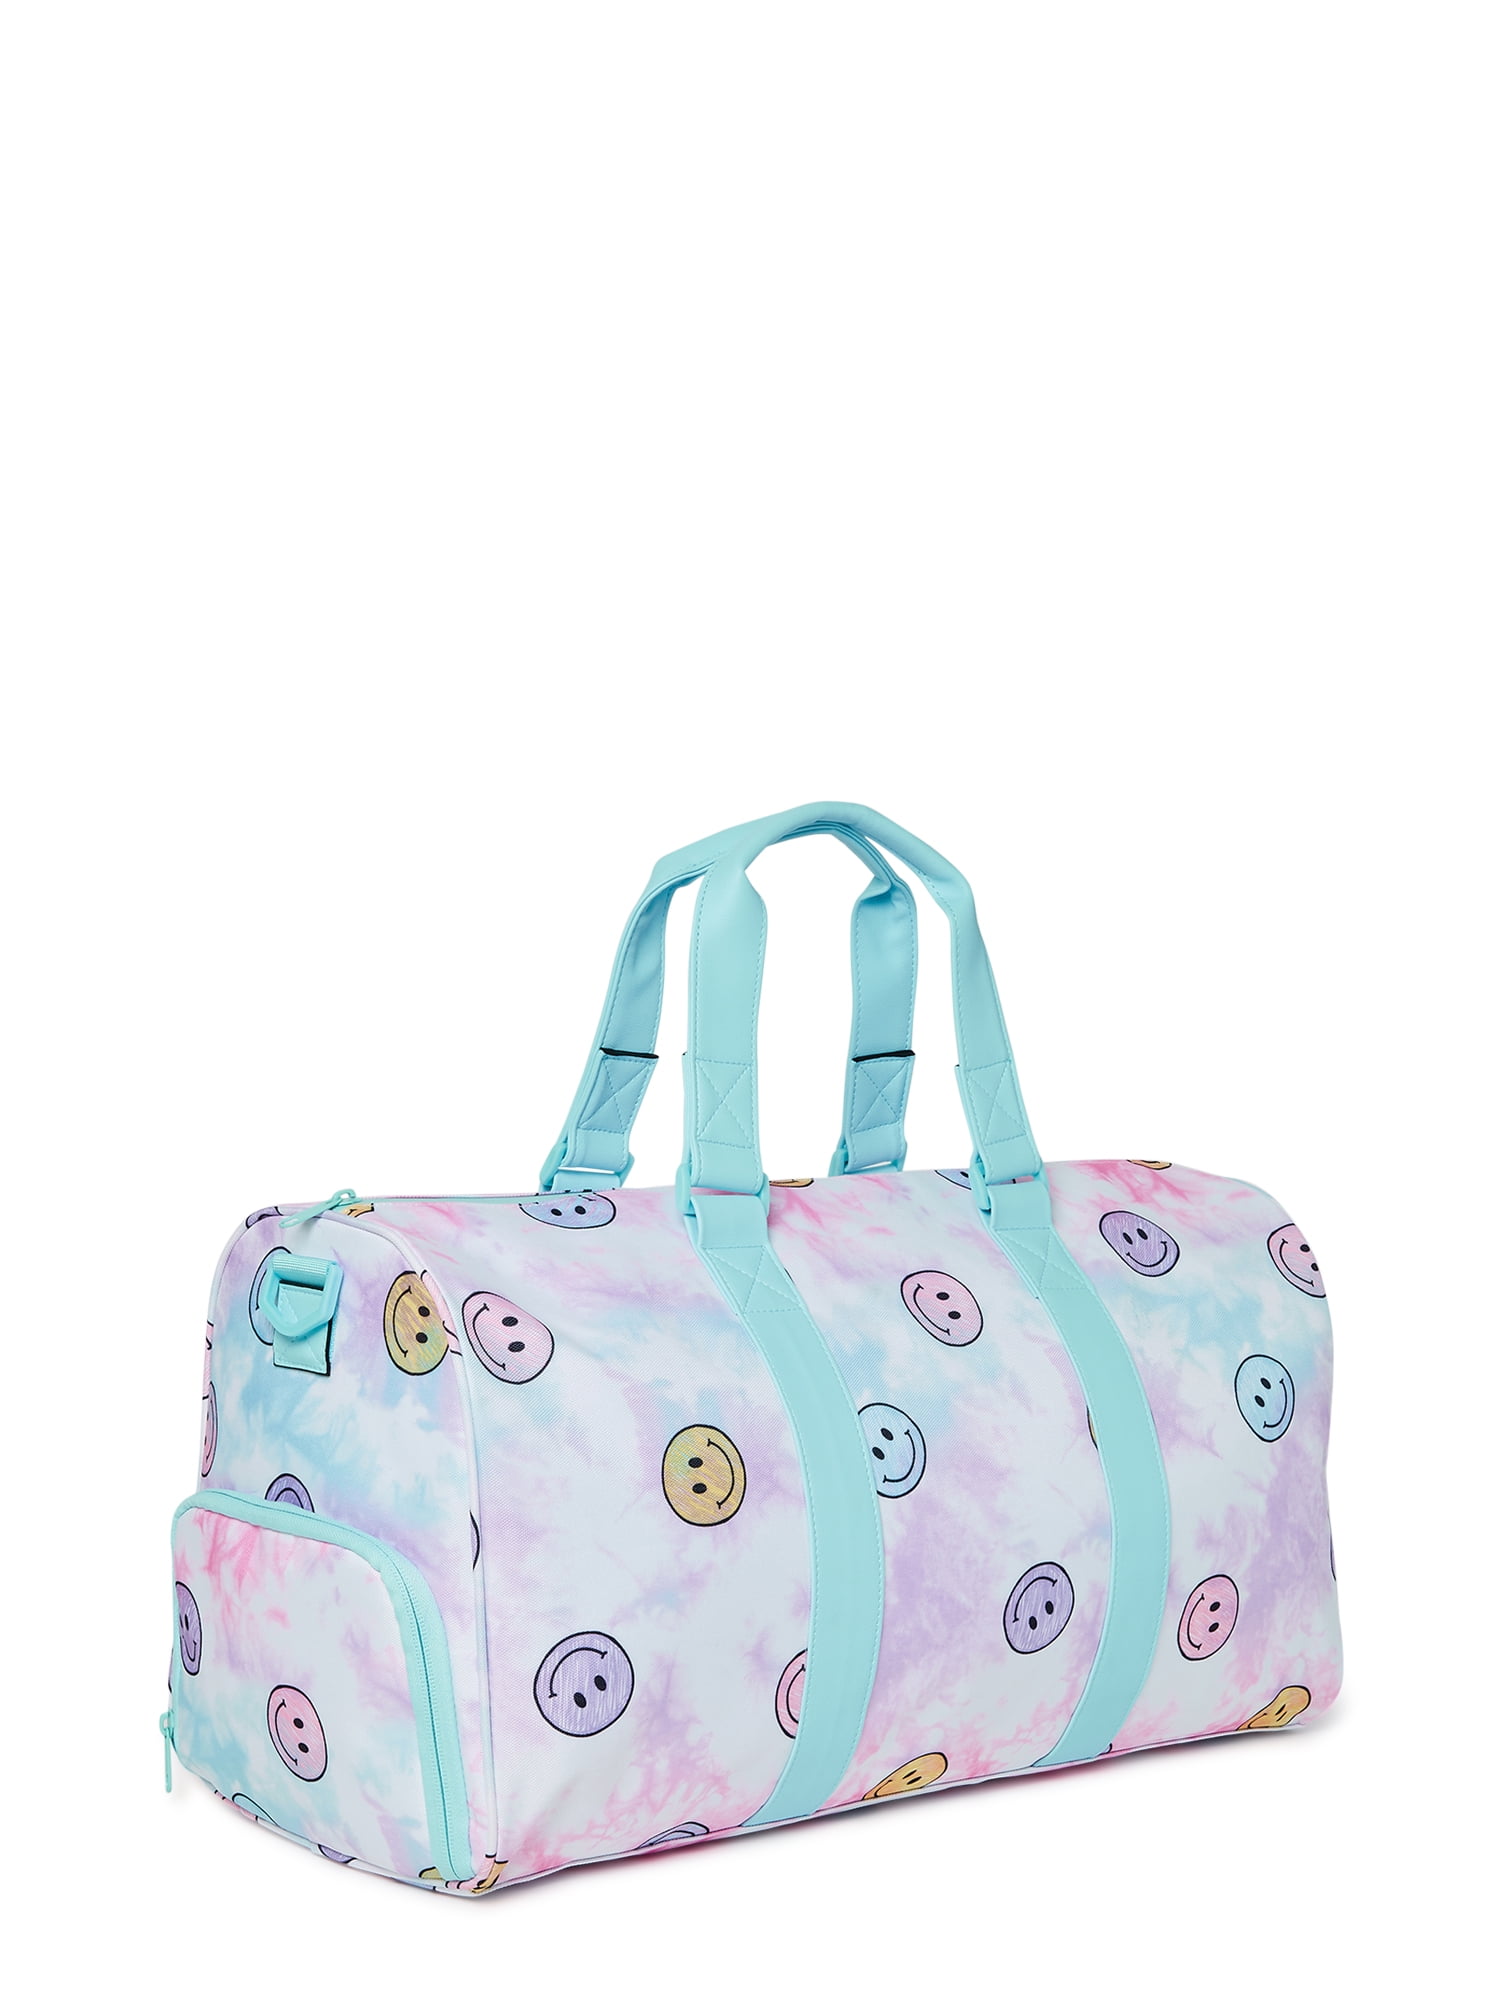 Diamond Painting White Rainbow Duffel Bag Great for Travelling With Your  WIP. Zipper Top Keeps Your Supplies Safe Perfect DP Lover Gift 